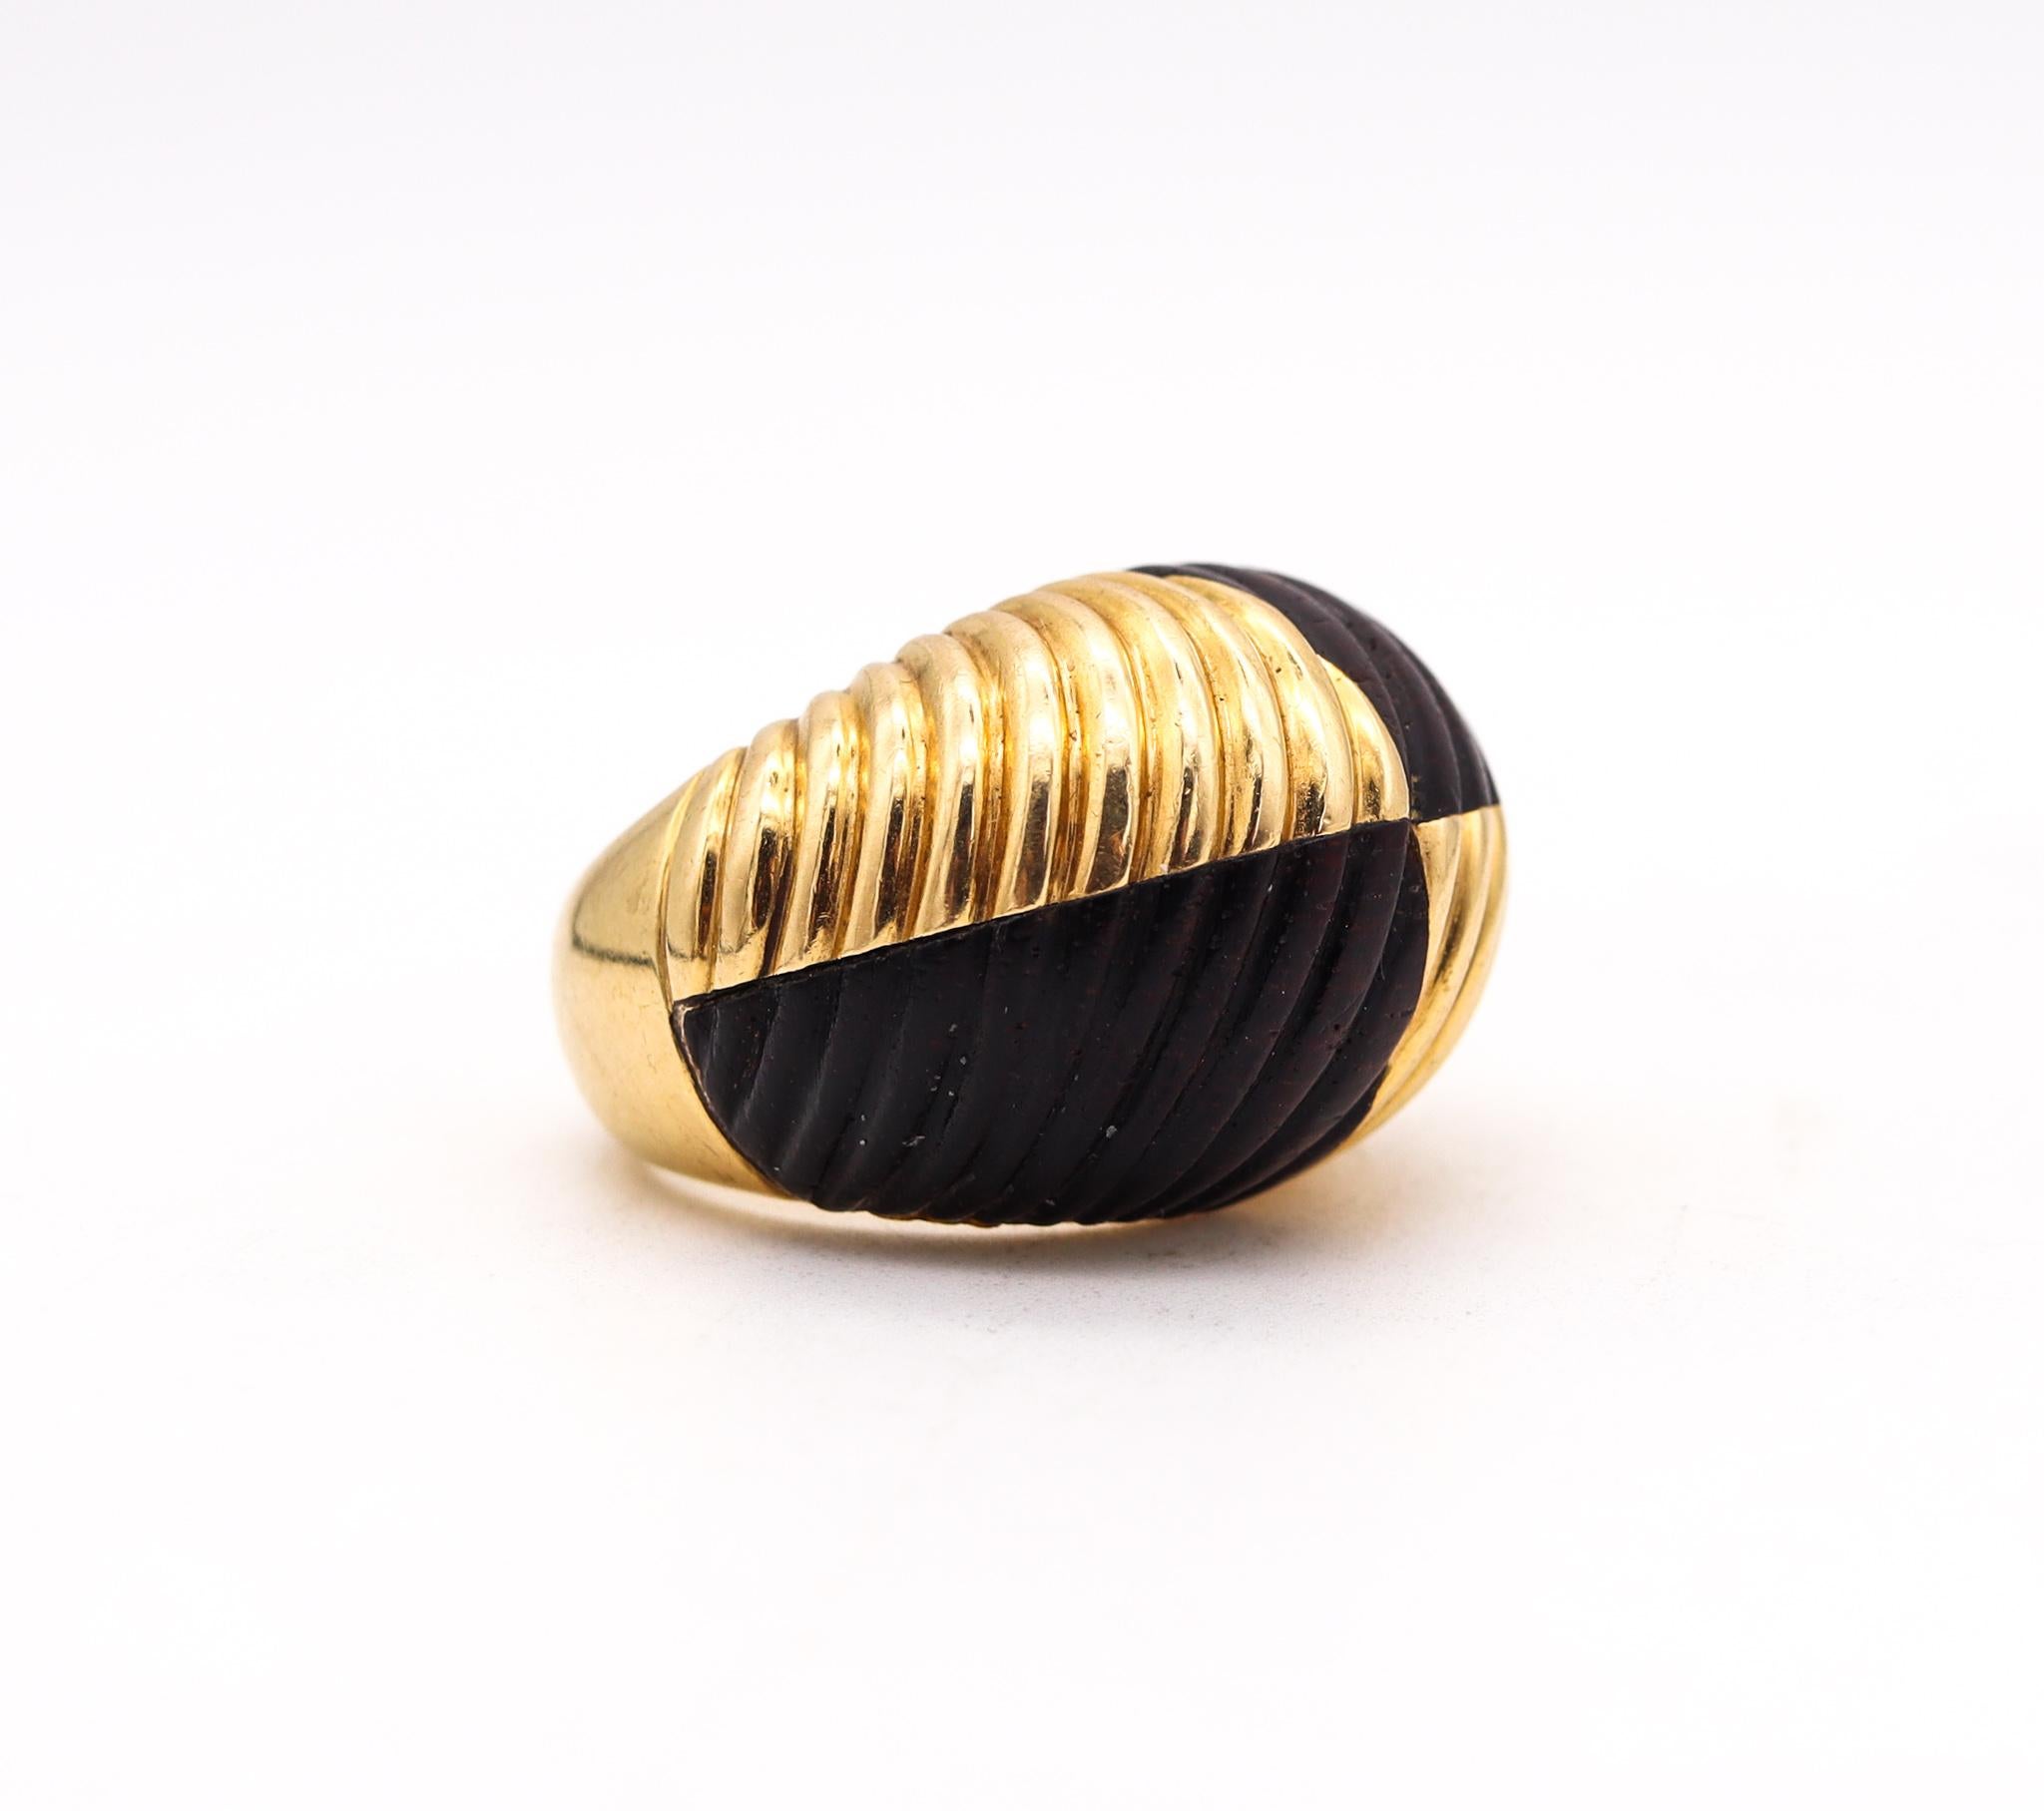 Van Cleef & Arpels 1970 Paris Bombe Wood Cocktail Ring in 18Kt Yellow Gold In Excellent Condition For Sale In Miami, FL